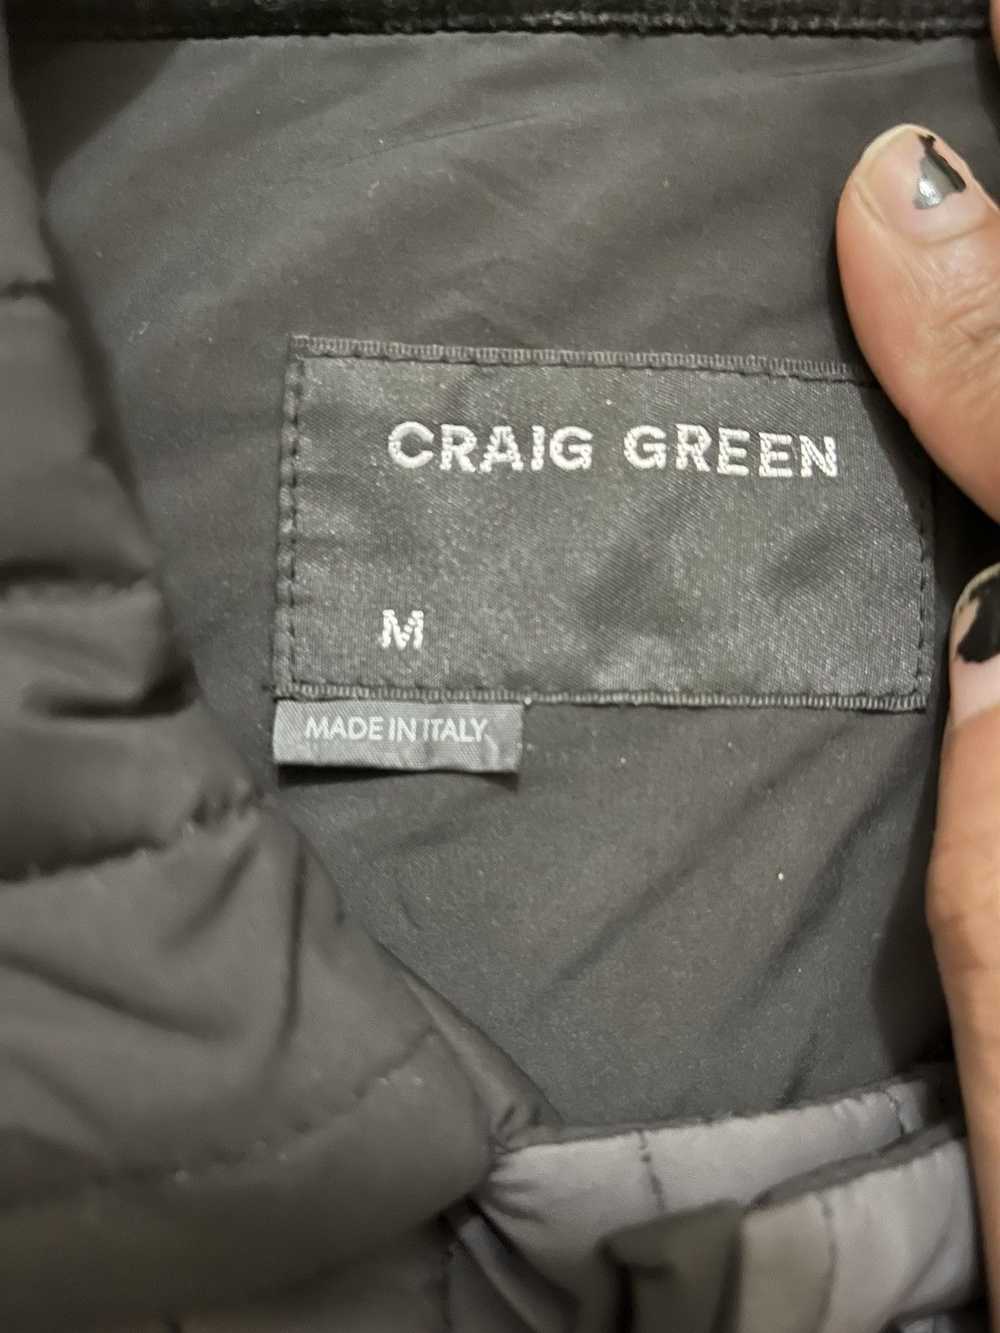 Craig Green Craig Green SS20 Quilted Work Jacket - image 3